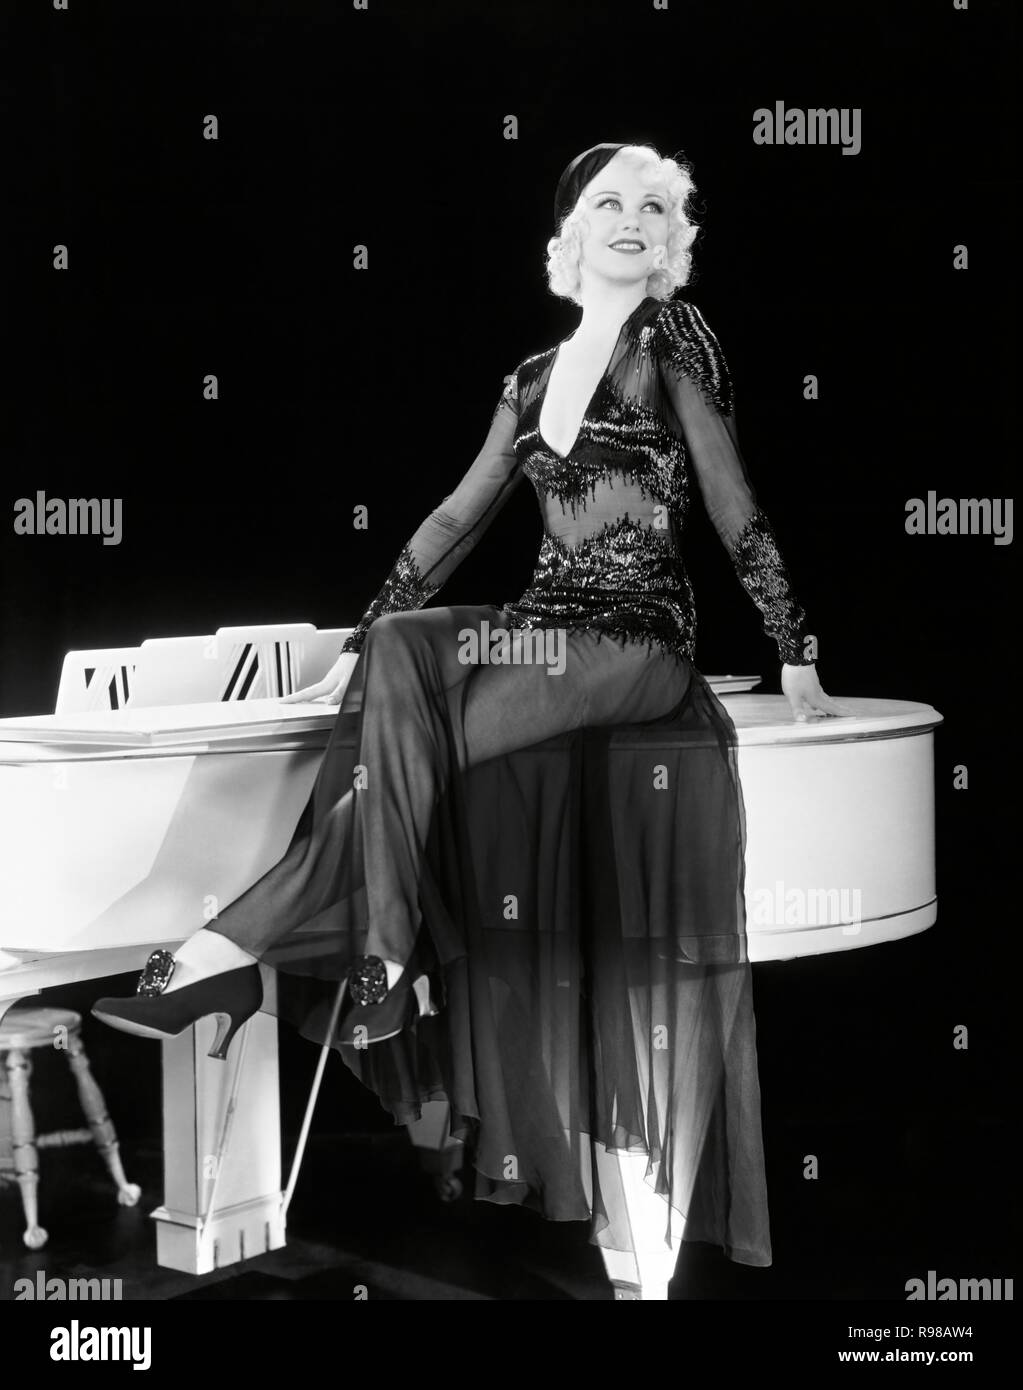 Original film title: GOLD DIGGERS OF 1933. English title: GOLD DIGGERS OF 1933. Year: 1933. Director: MERVYN LEROY. Stars: GINGER ROGERS. Credit: WARNER BROTHERS / Album Stock Photo